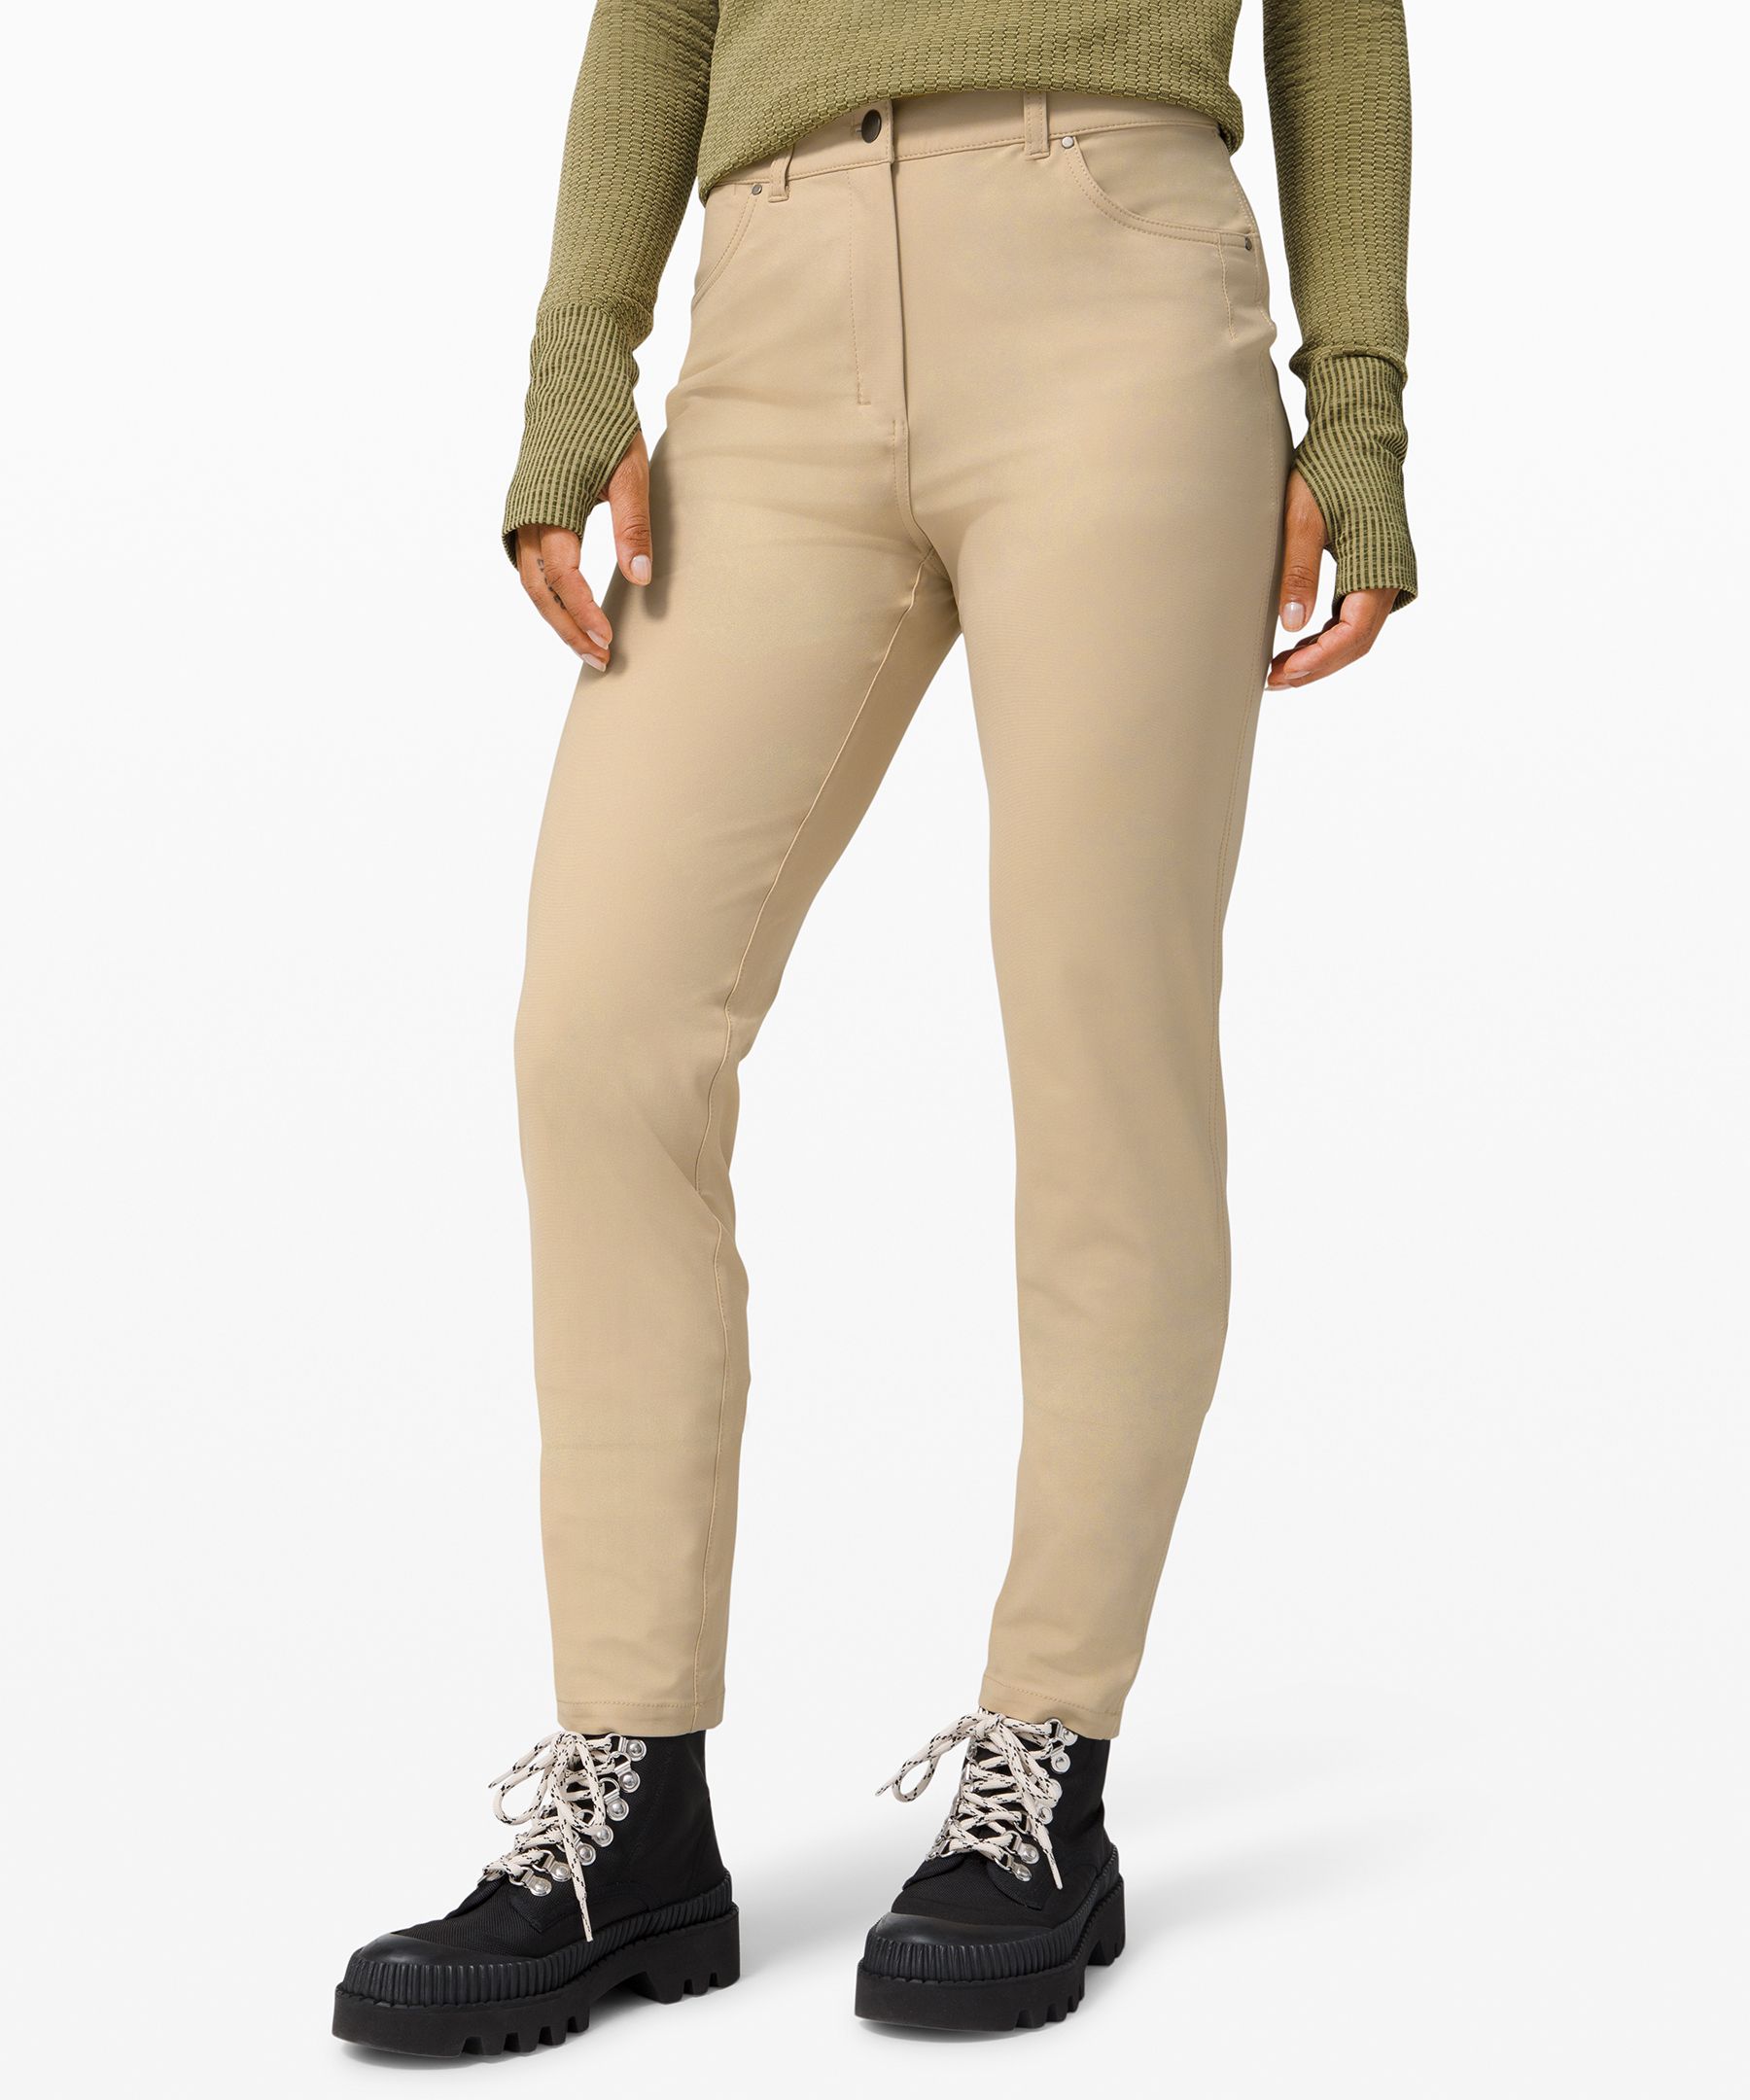 Lululemon City Sleek 5 Pocket Pant Review  International Society of  Precision Agriculture